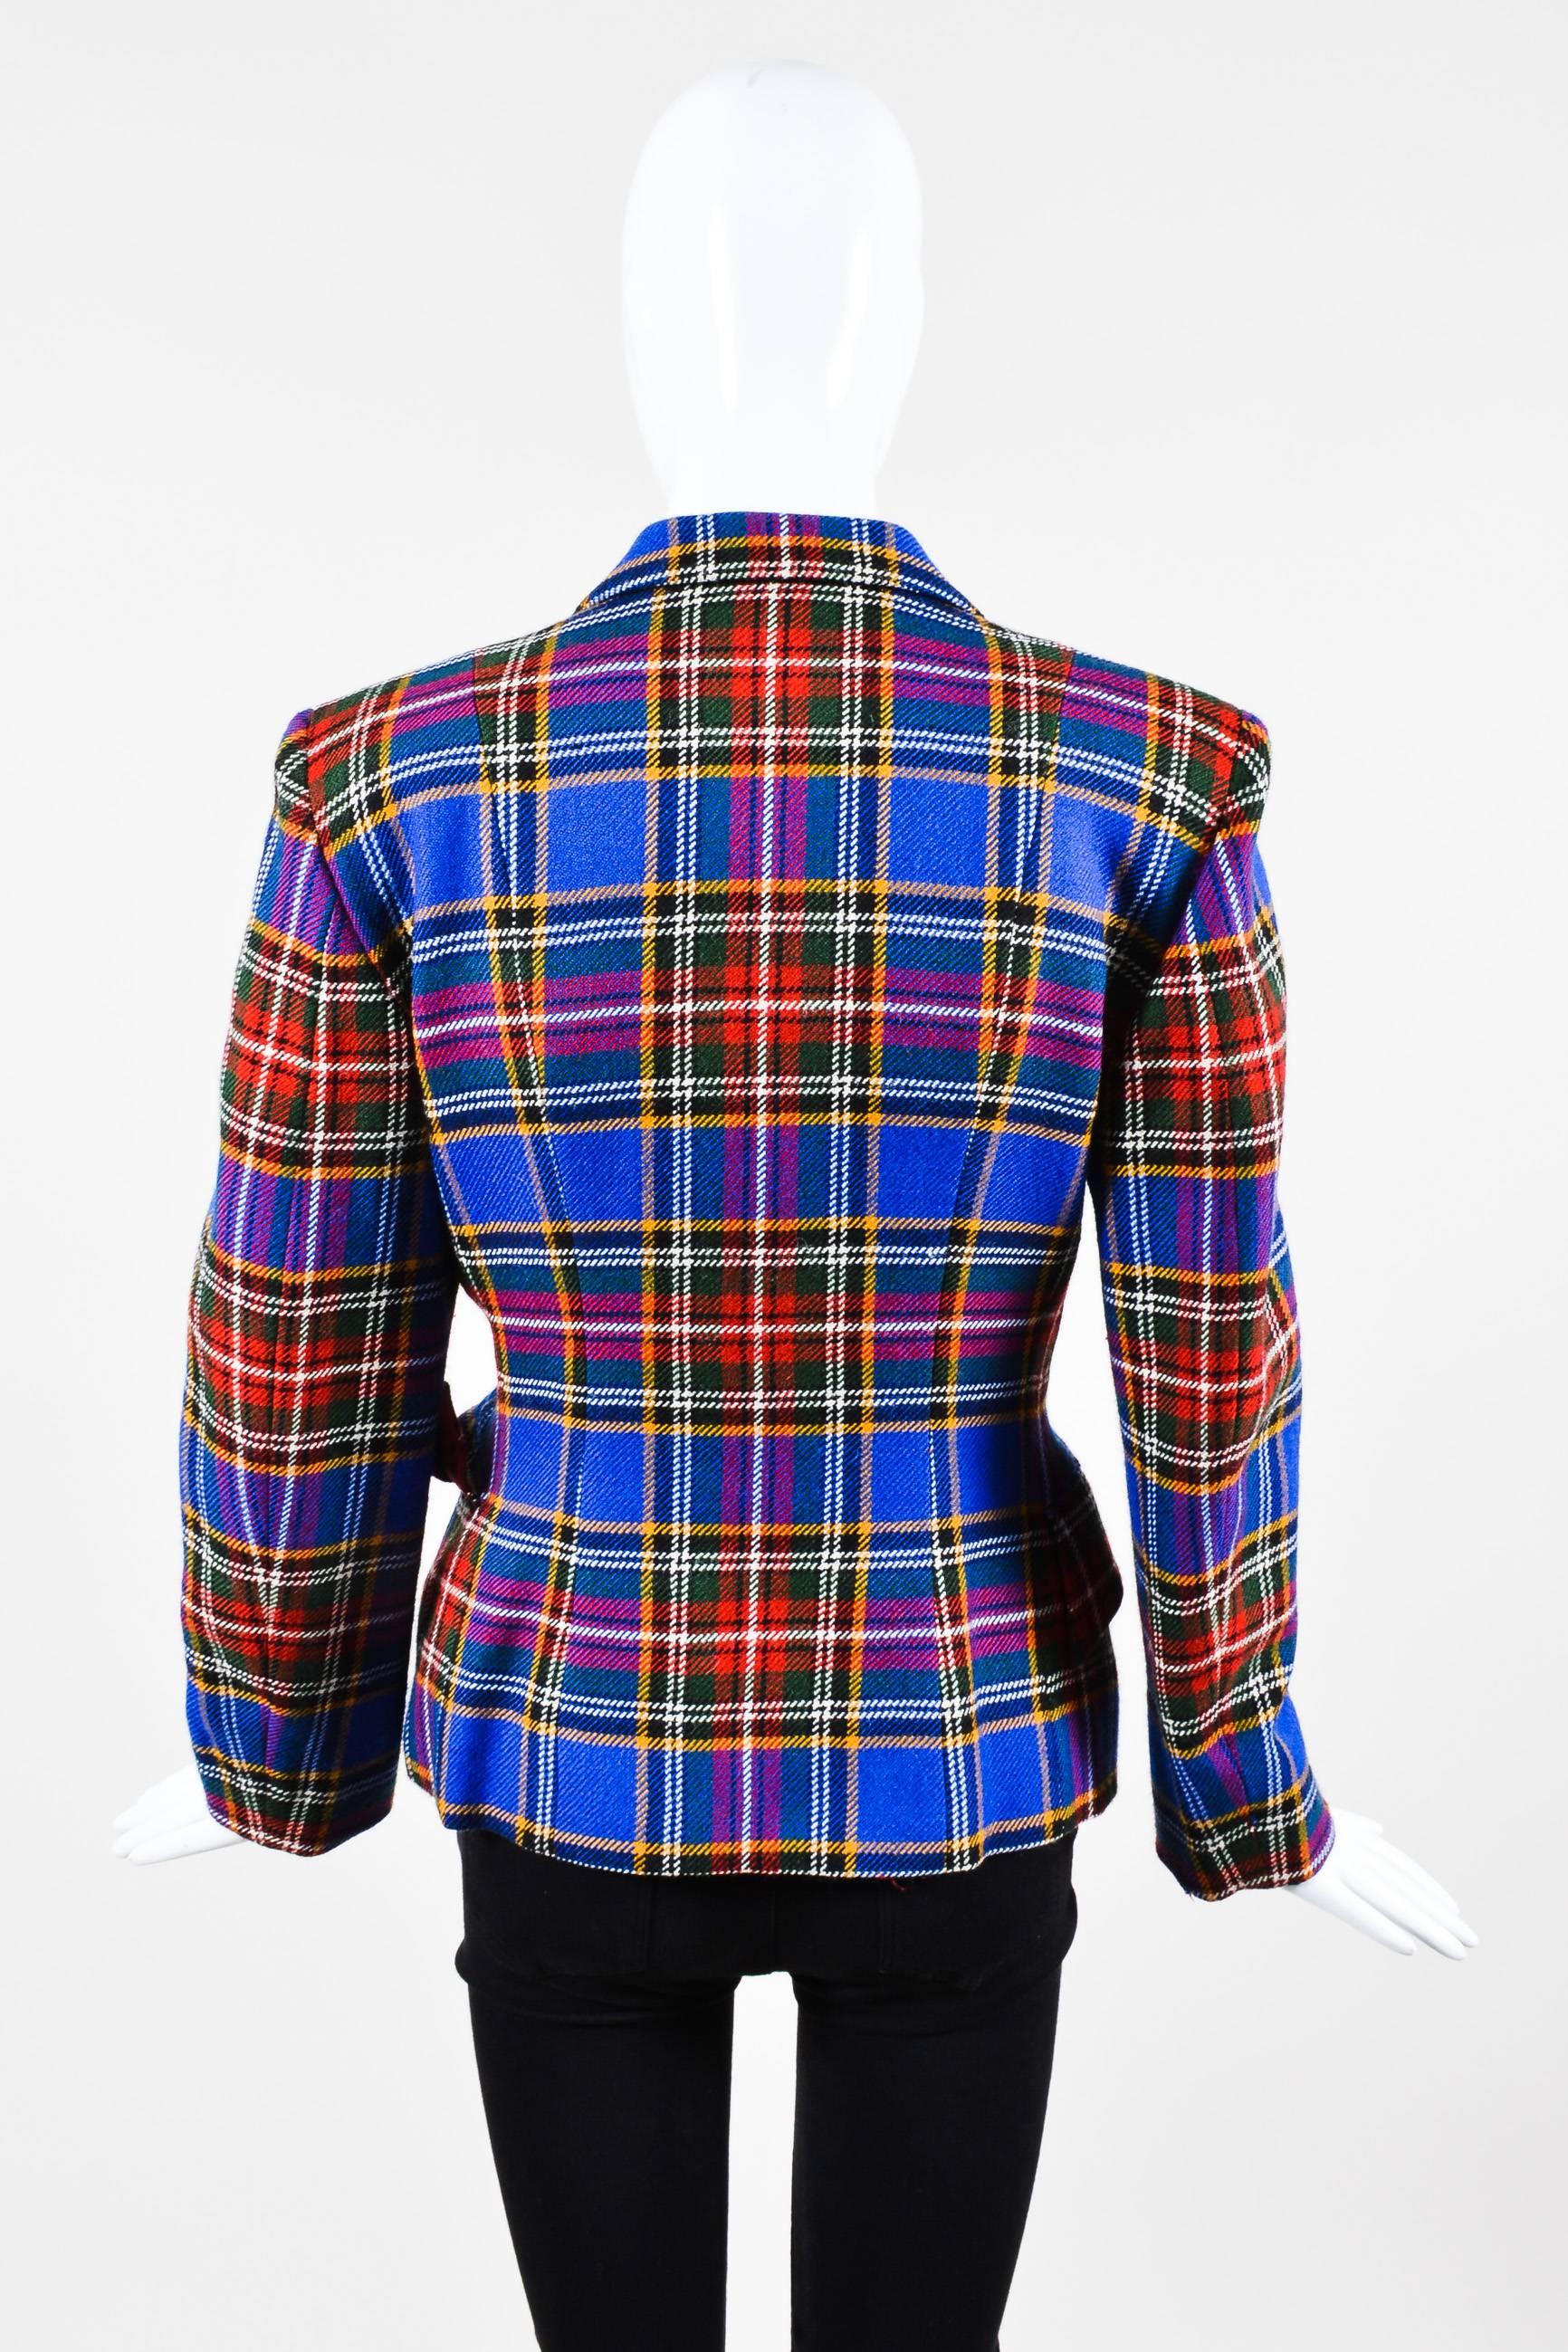 Uniquely chic vintage jacket perfect for work, an event or a casual day out. Wool textile. Multicolor plaid pattern throughout. Whimsical front bath tub knob embellishment. Peak lapel collar. Hits at hips. Long sleeve. Side flap pockets. Padded